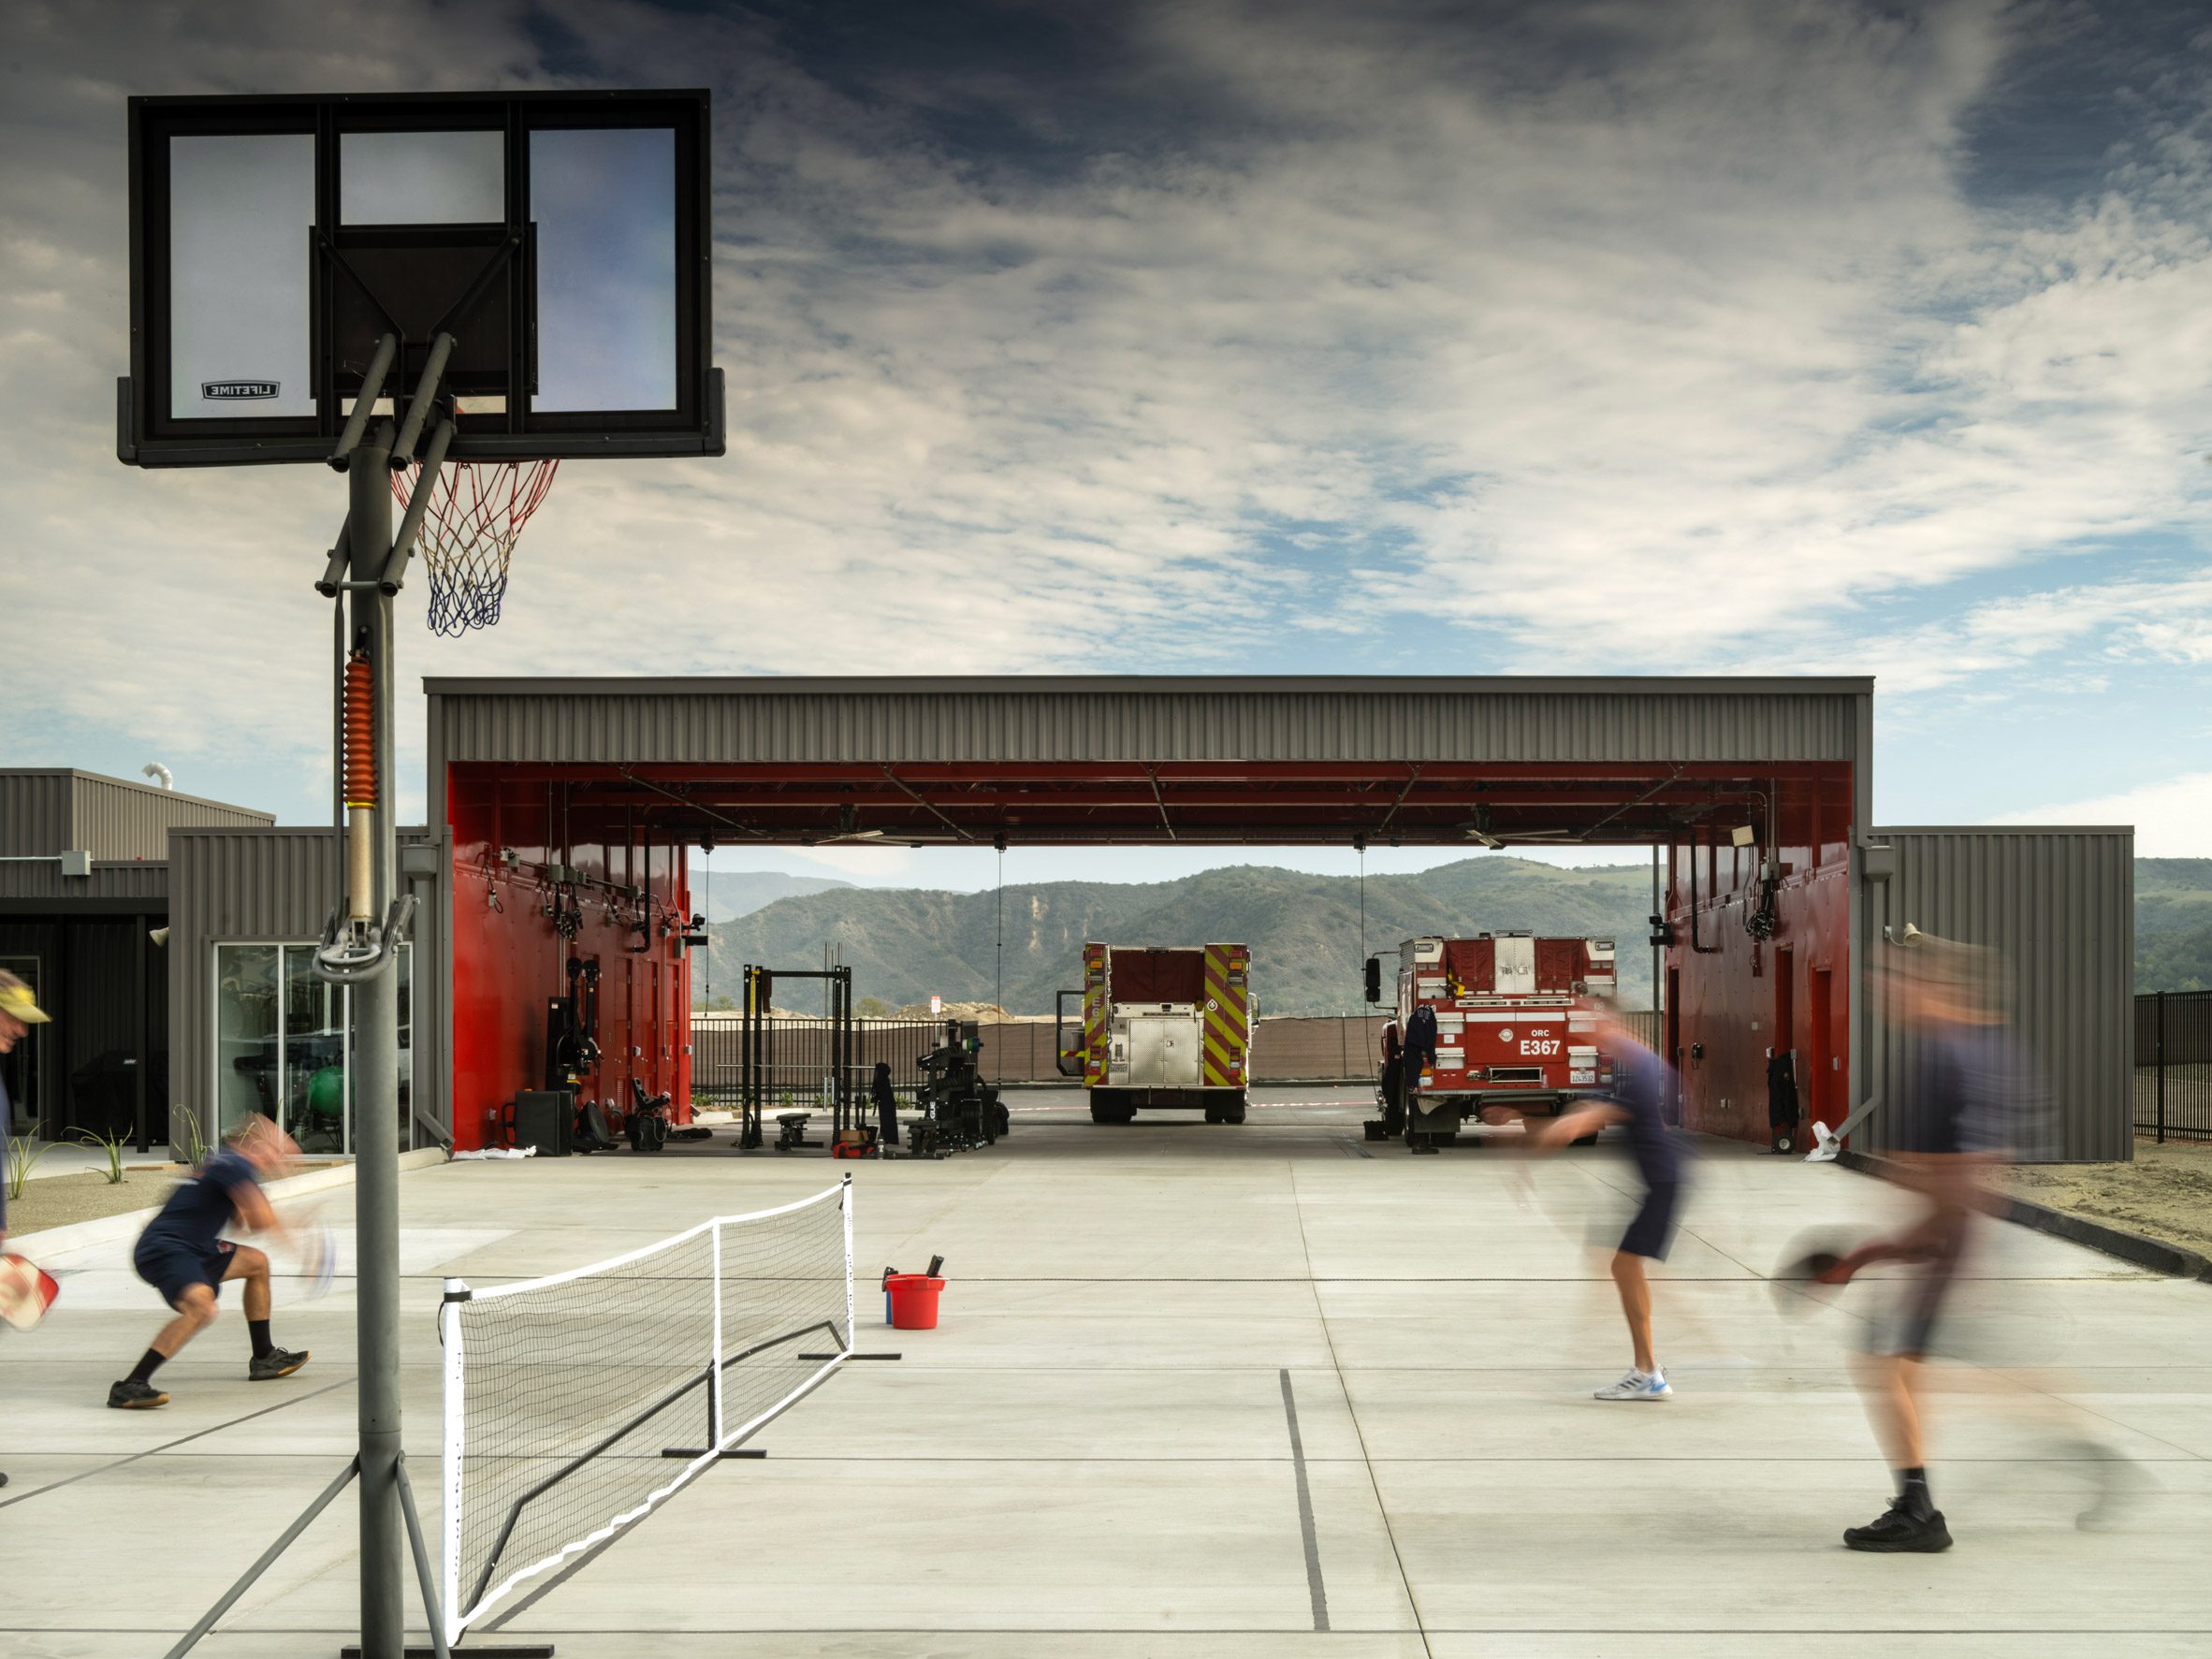 Fire station with basket ball court